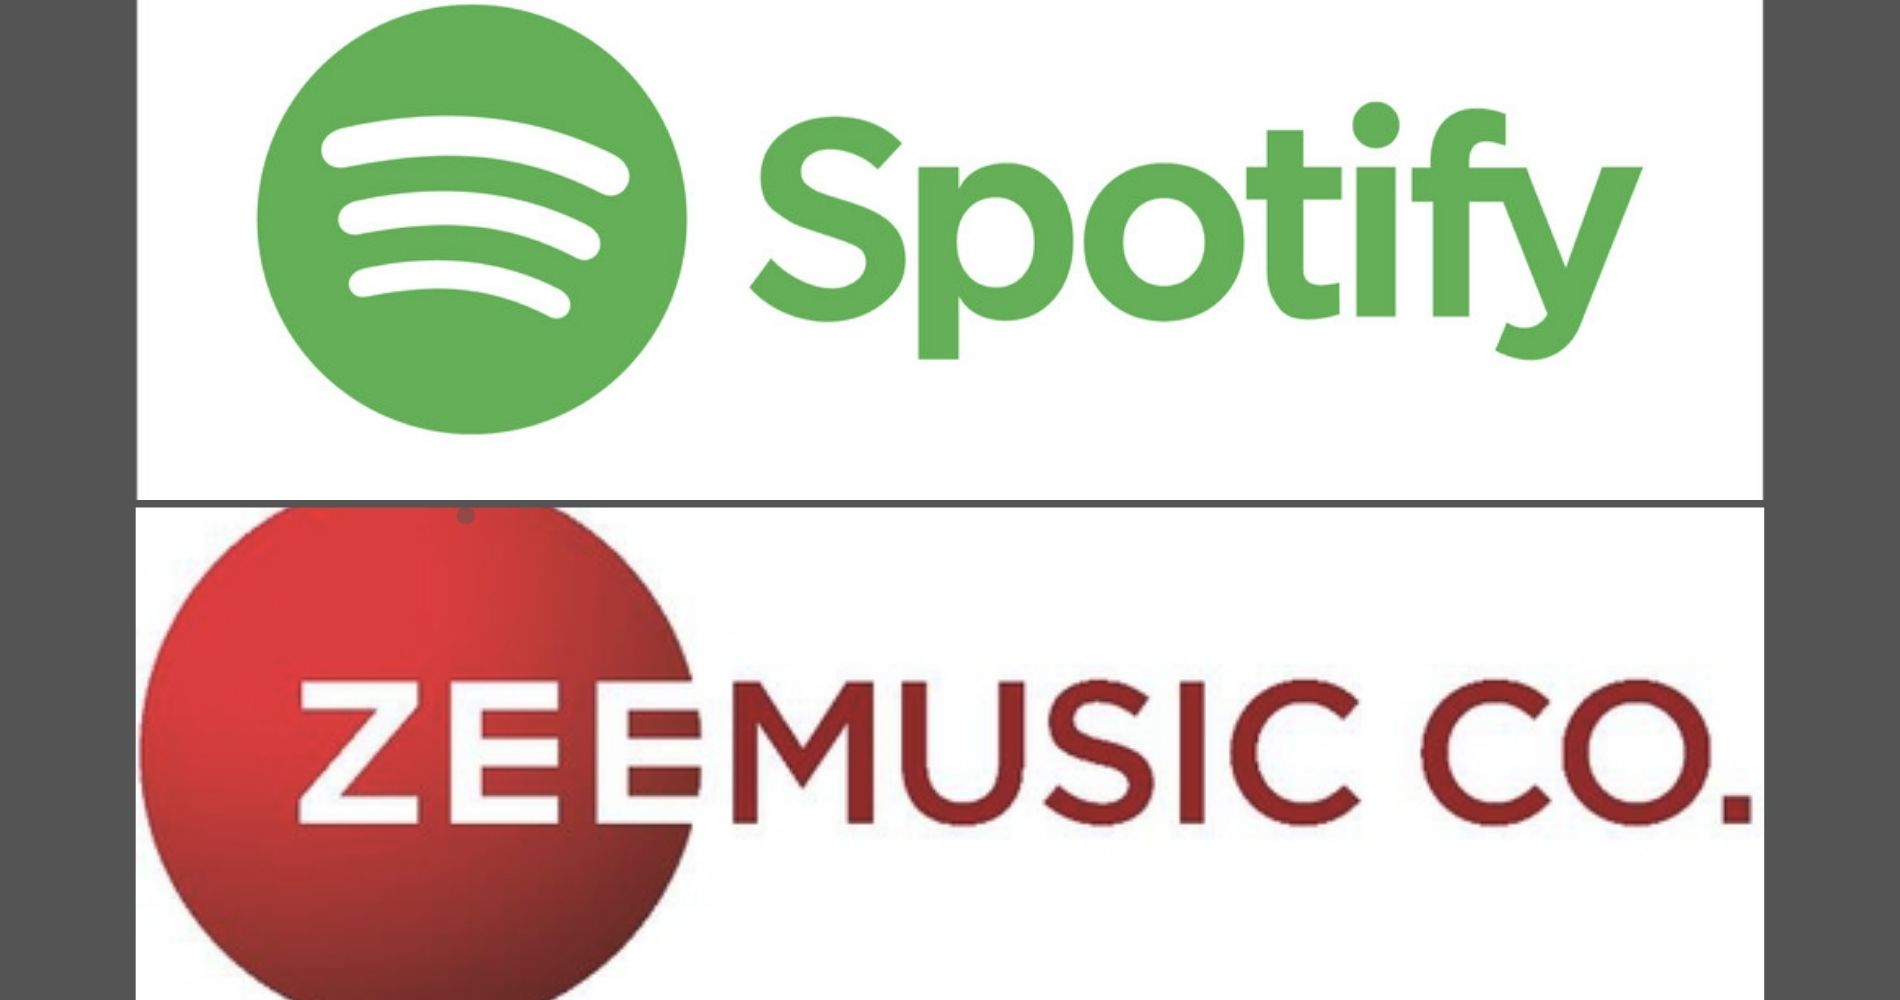 Spotify And Zee Music Company Clash Over Licensing, Resulting In Catalog Removal